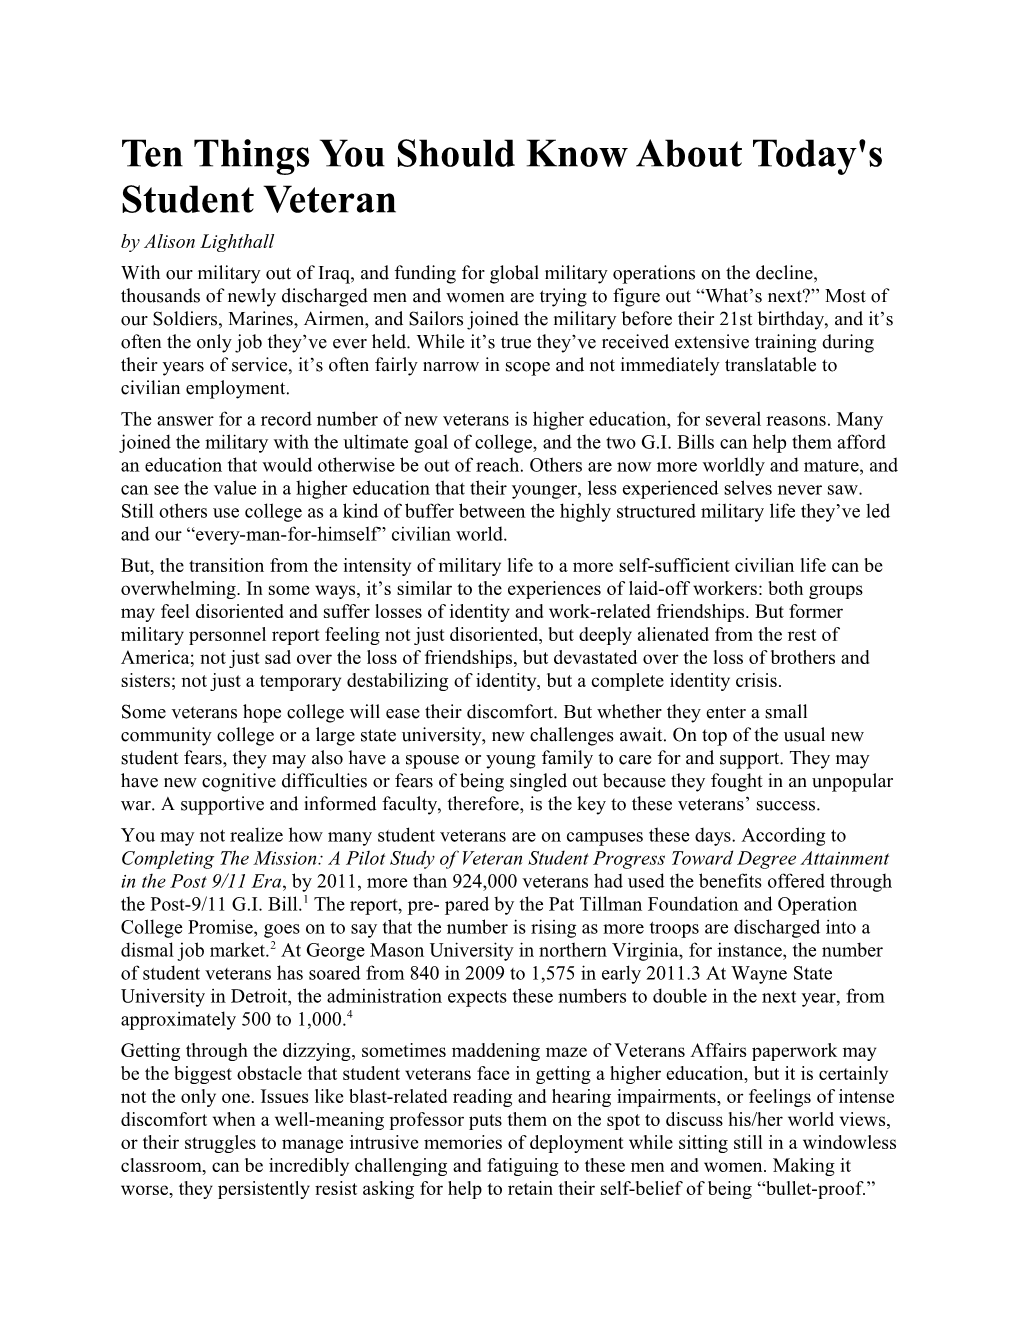 Ten Things You Should Know About Today's Student Veteran